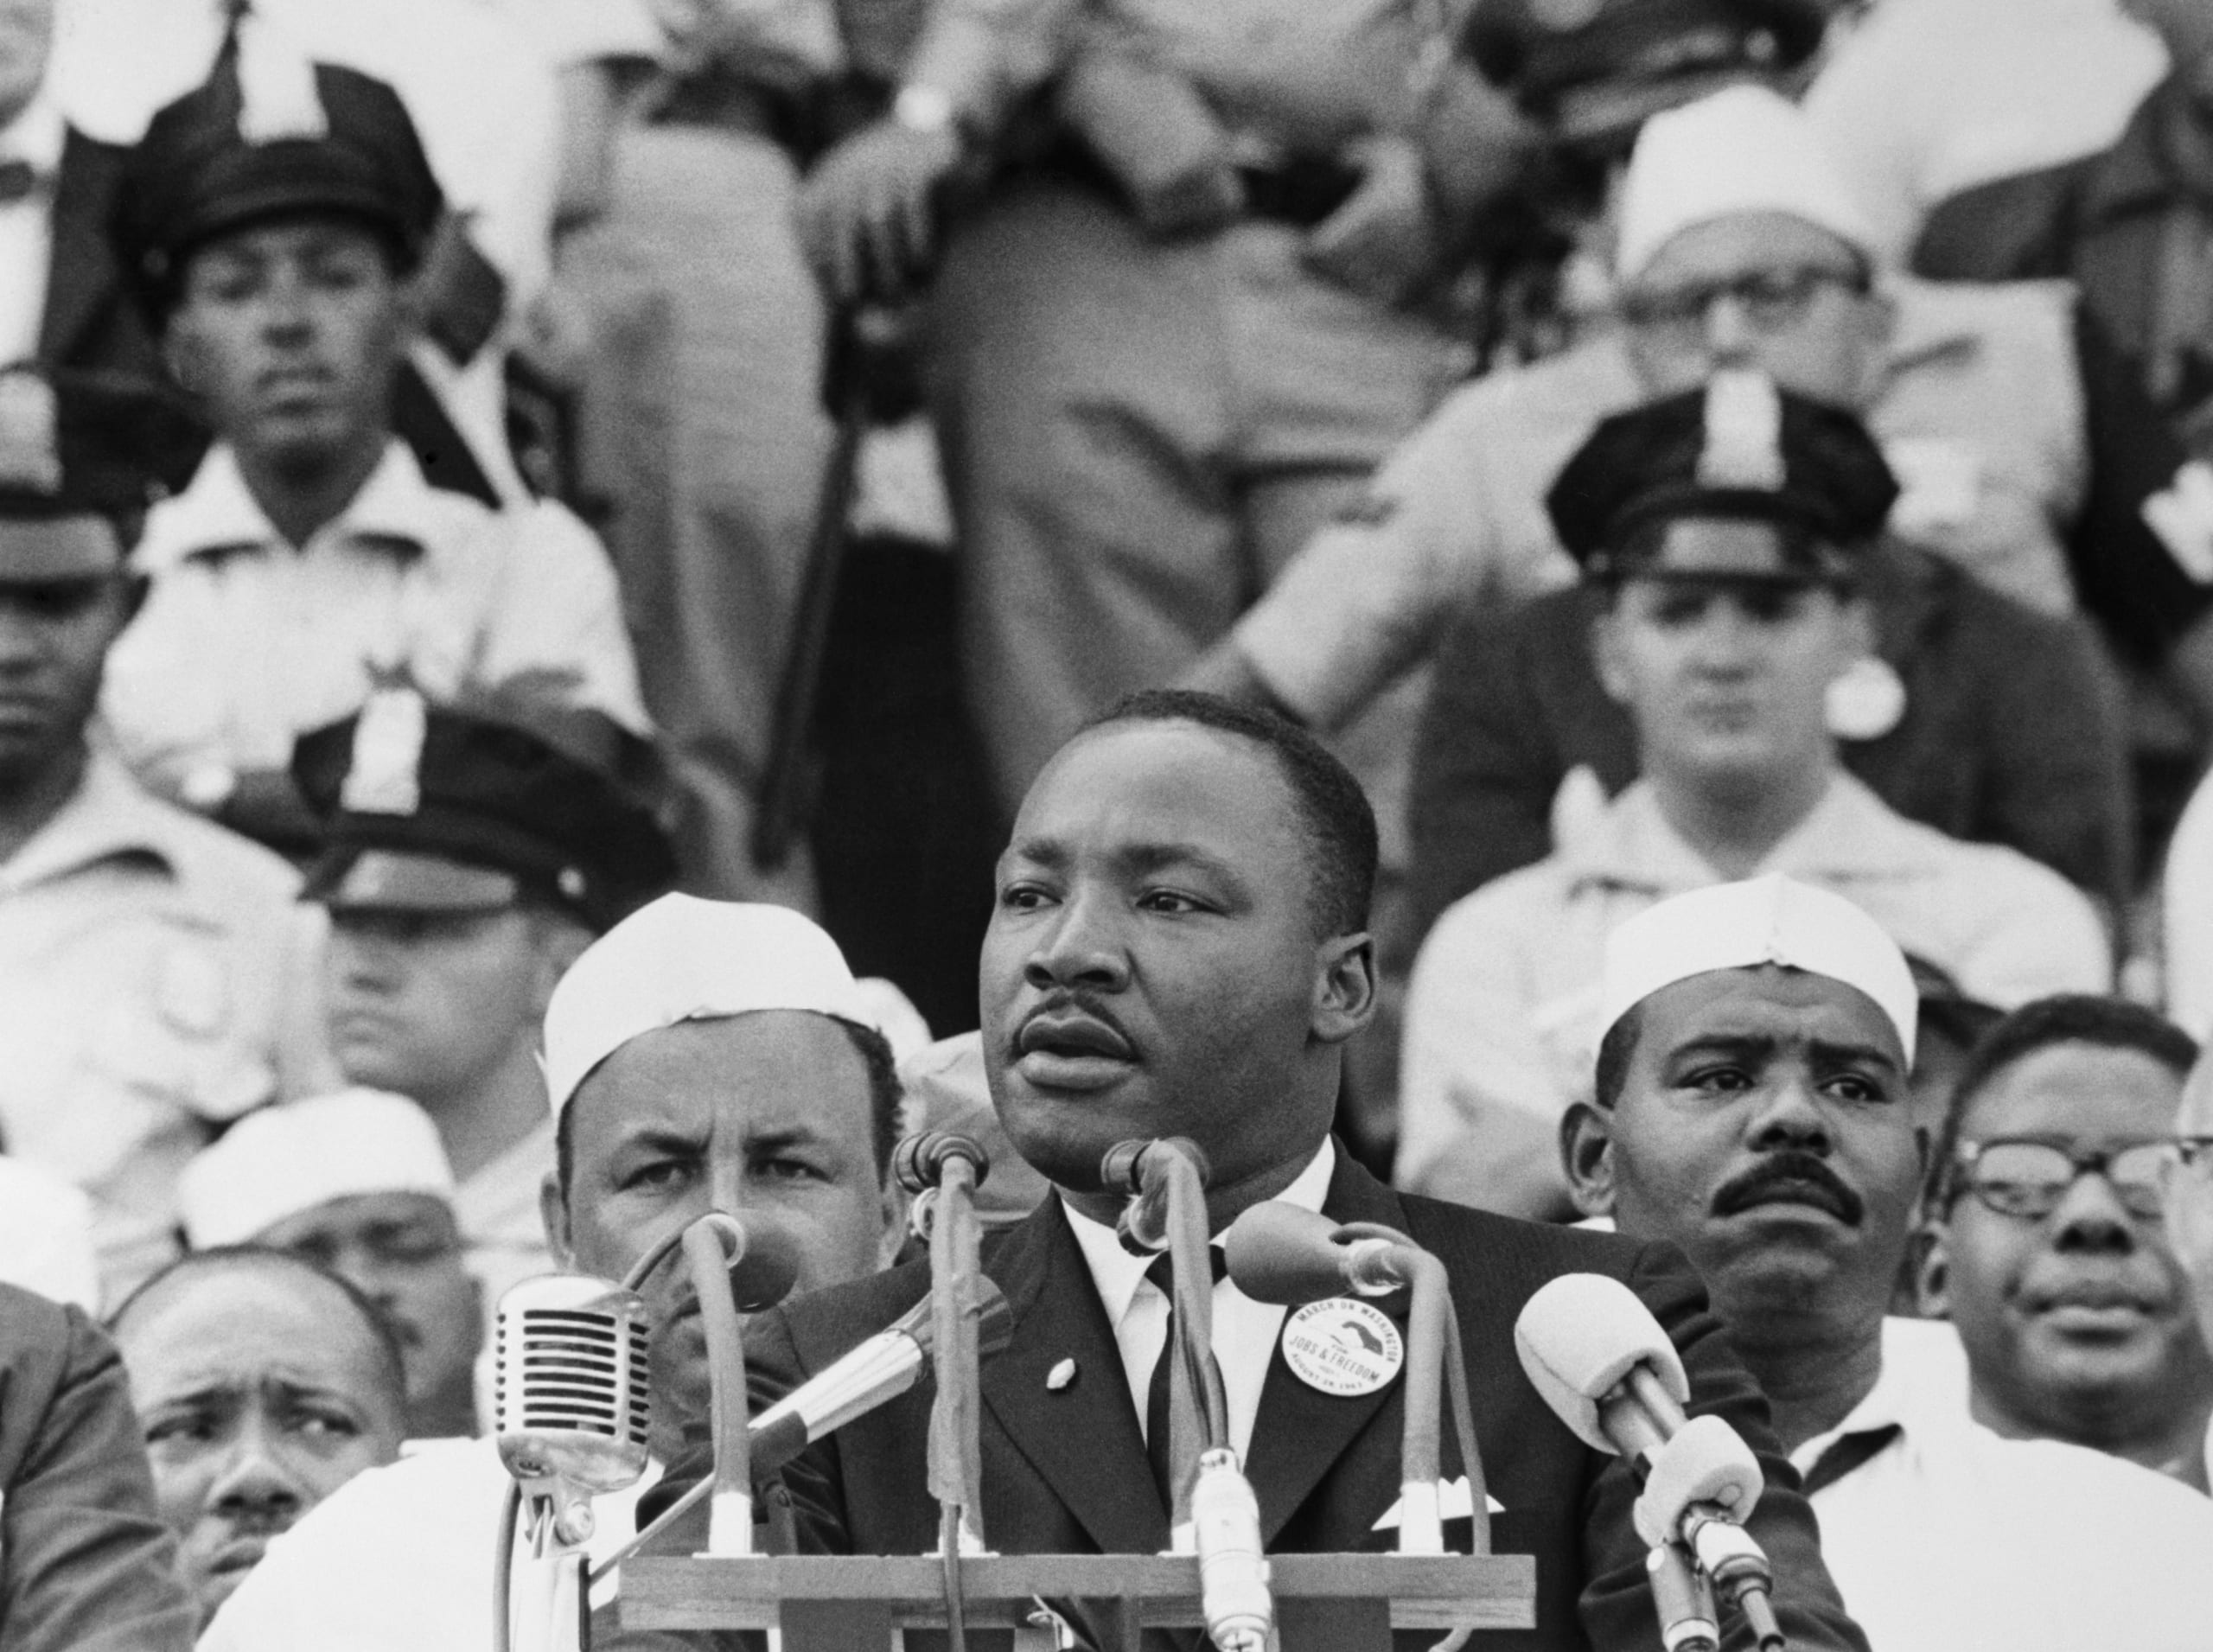 MLK speech one of TV’s 75 most impactful moments